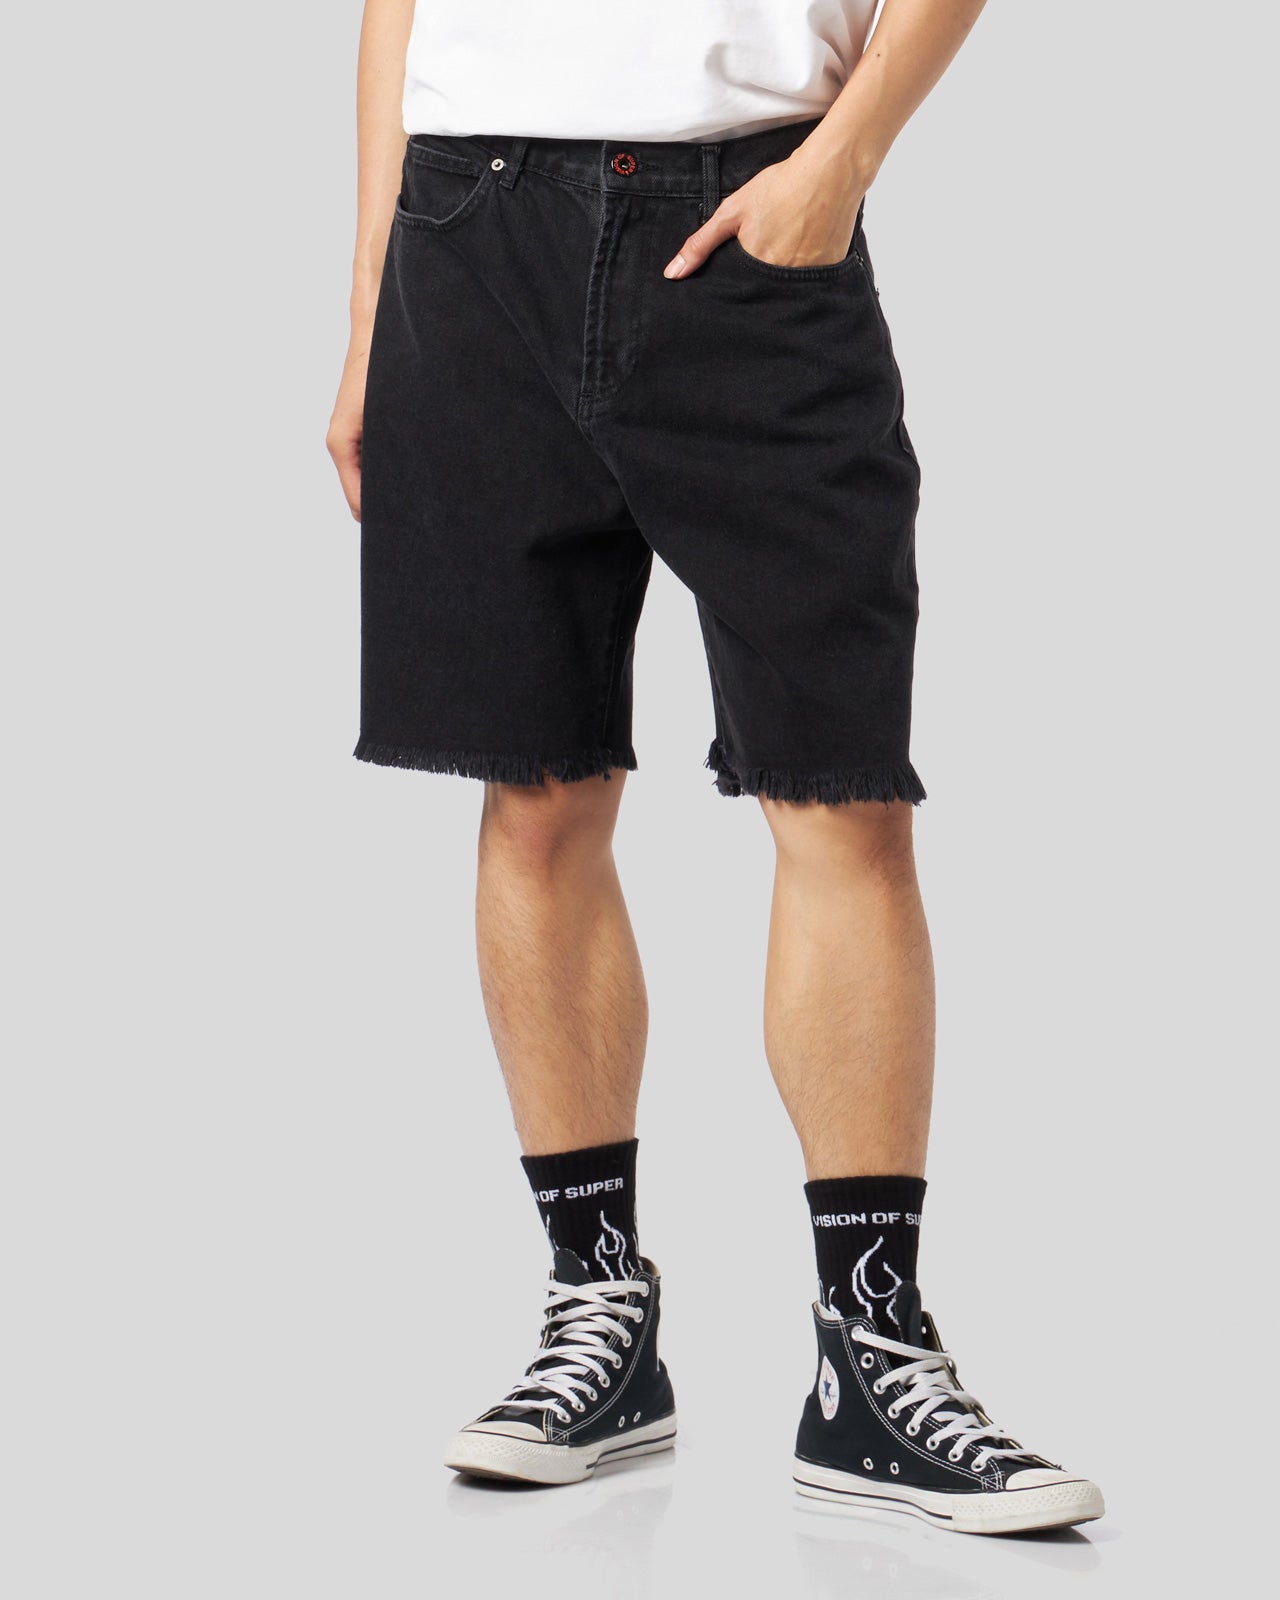 BLACK DENIM SHORTS WITH PRINTED LOGO AND FLAMES PATCH